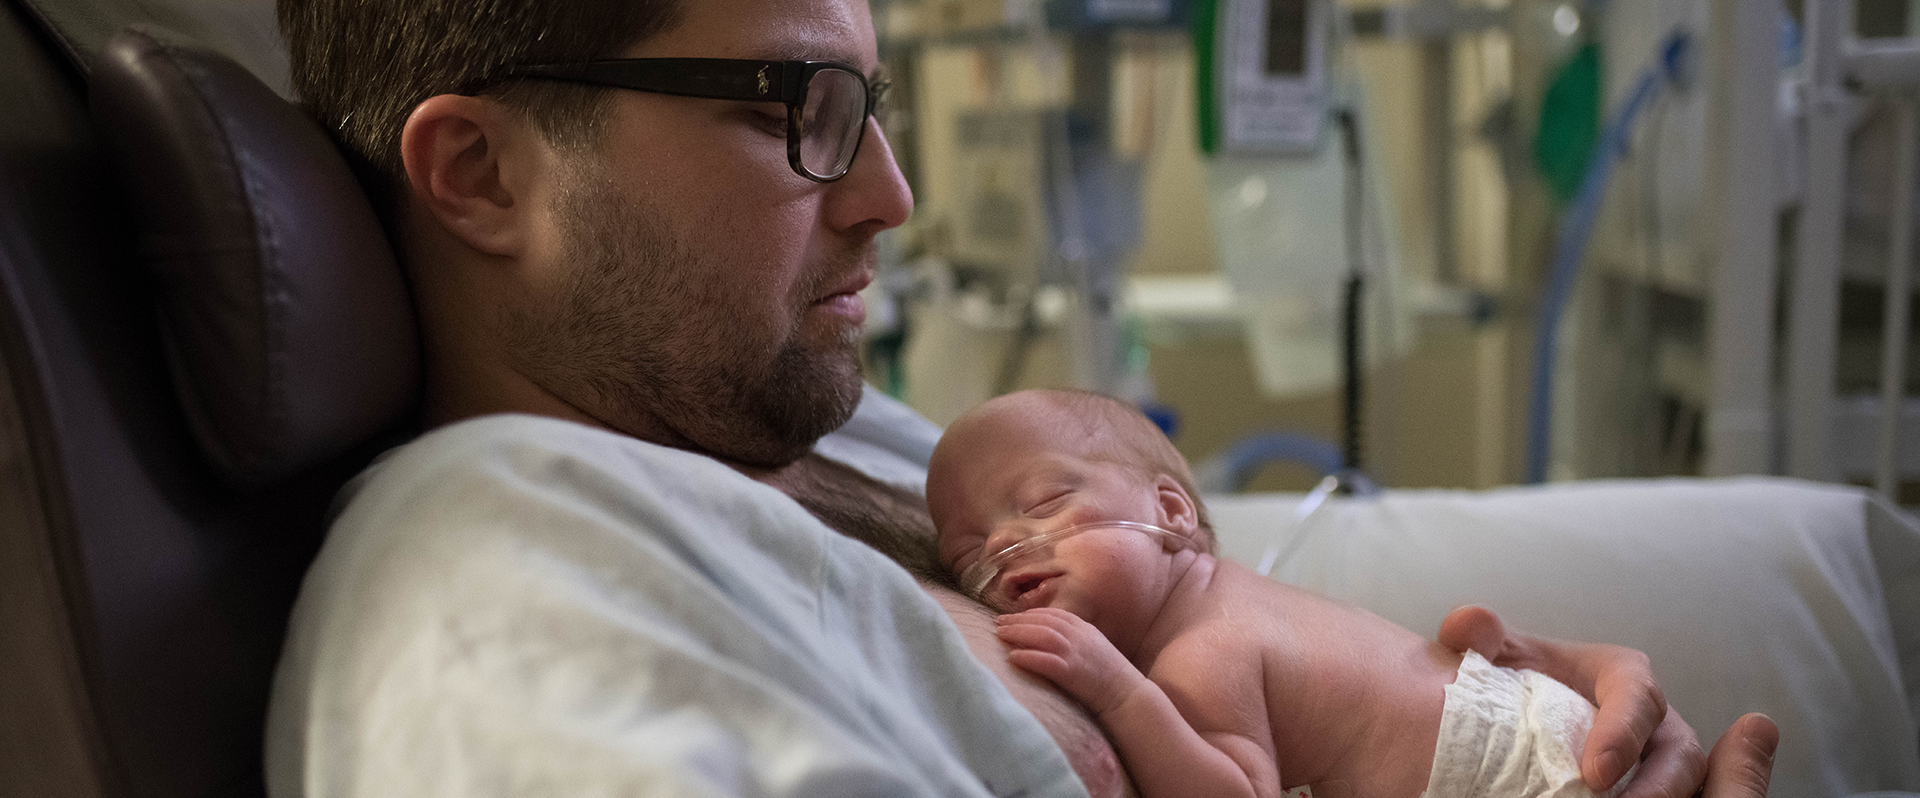 Dad and baby in NICU